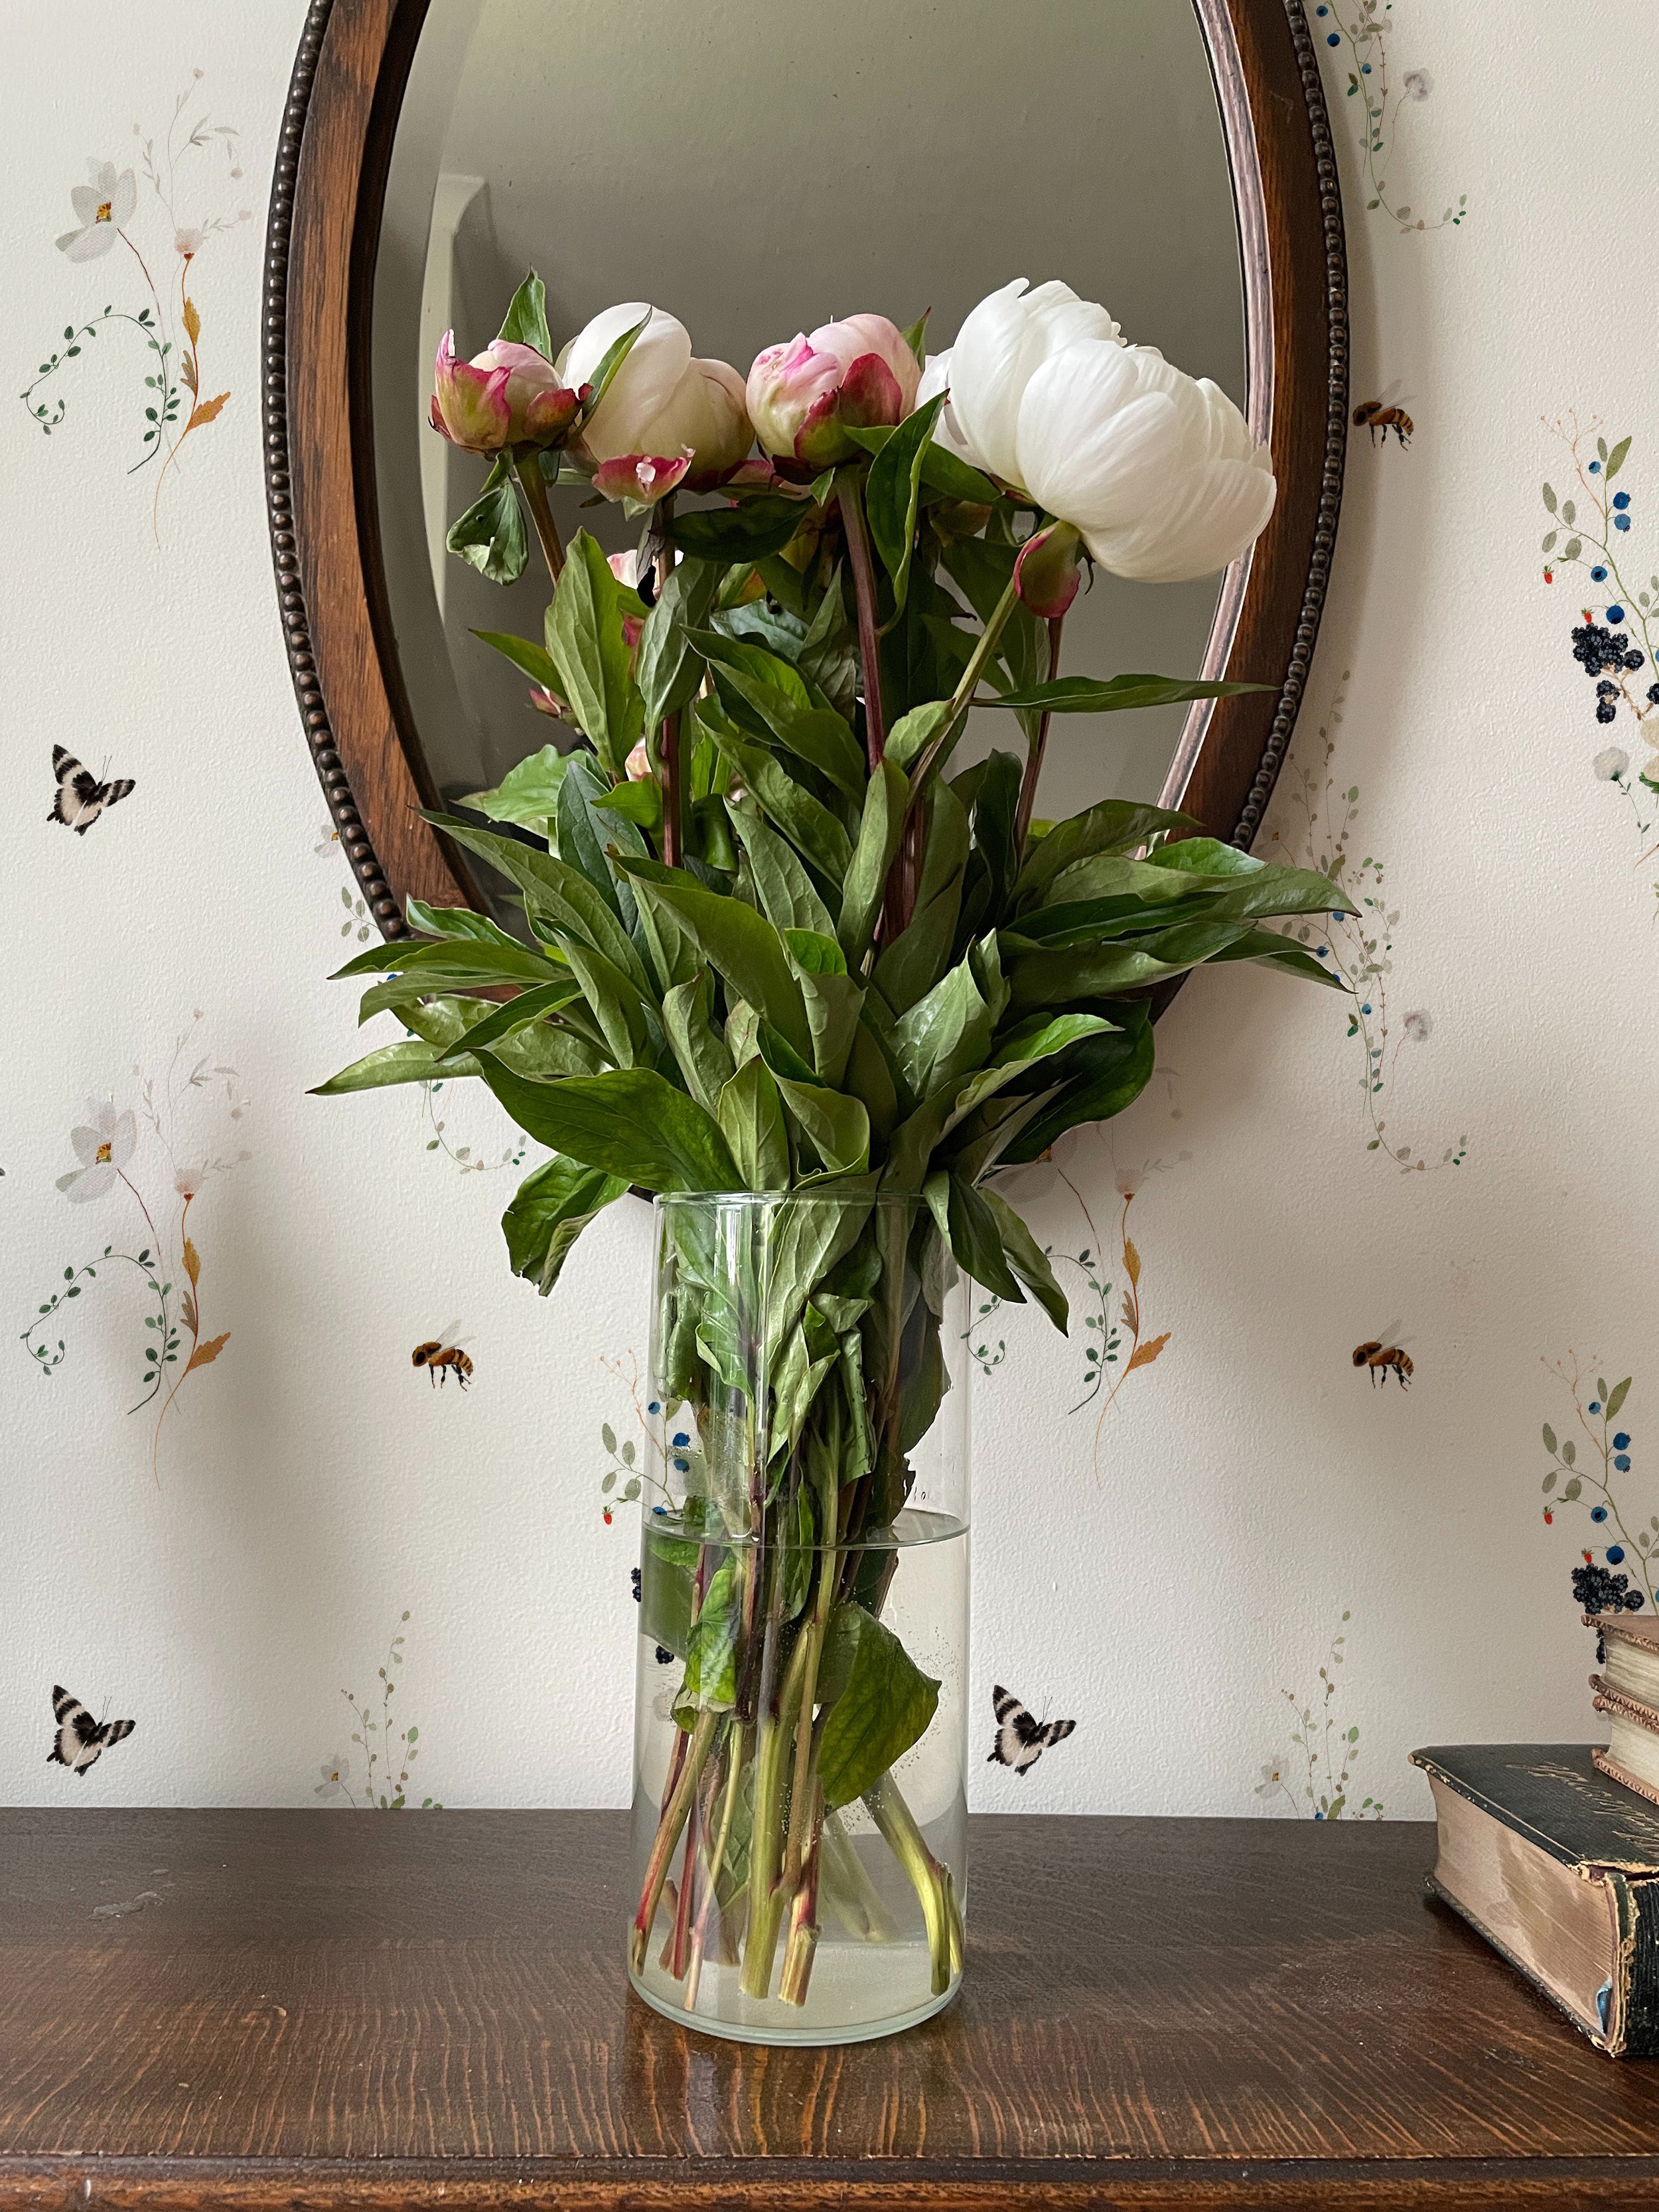 A rustic and charming interior featuring a vintage round mirror with a bouquet of pink and white tulips in a clear vase set on a wooden surface. The wall behind is adorned with a delicate wallpaper depicting small flowers, insects, and butterflies, creating a warm and inviting ambiance.